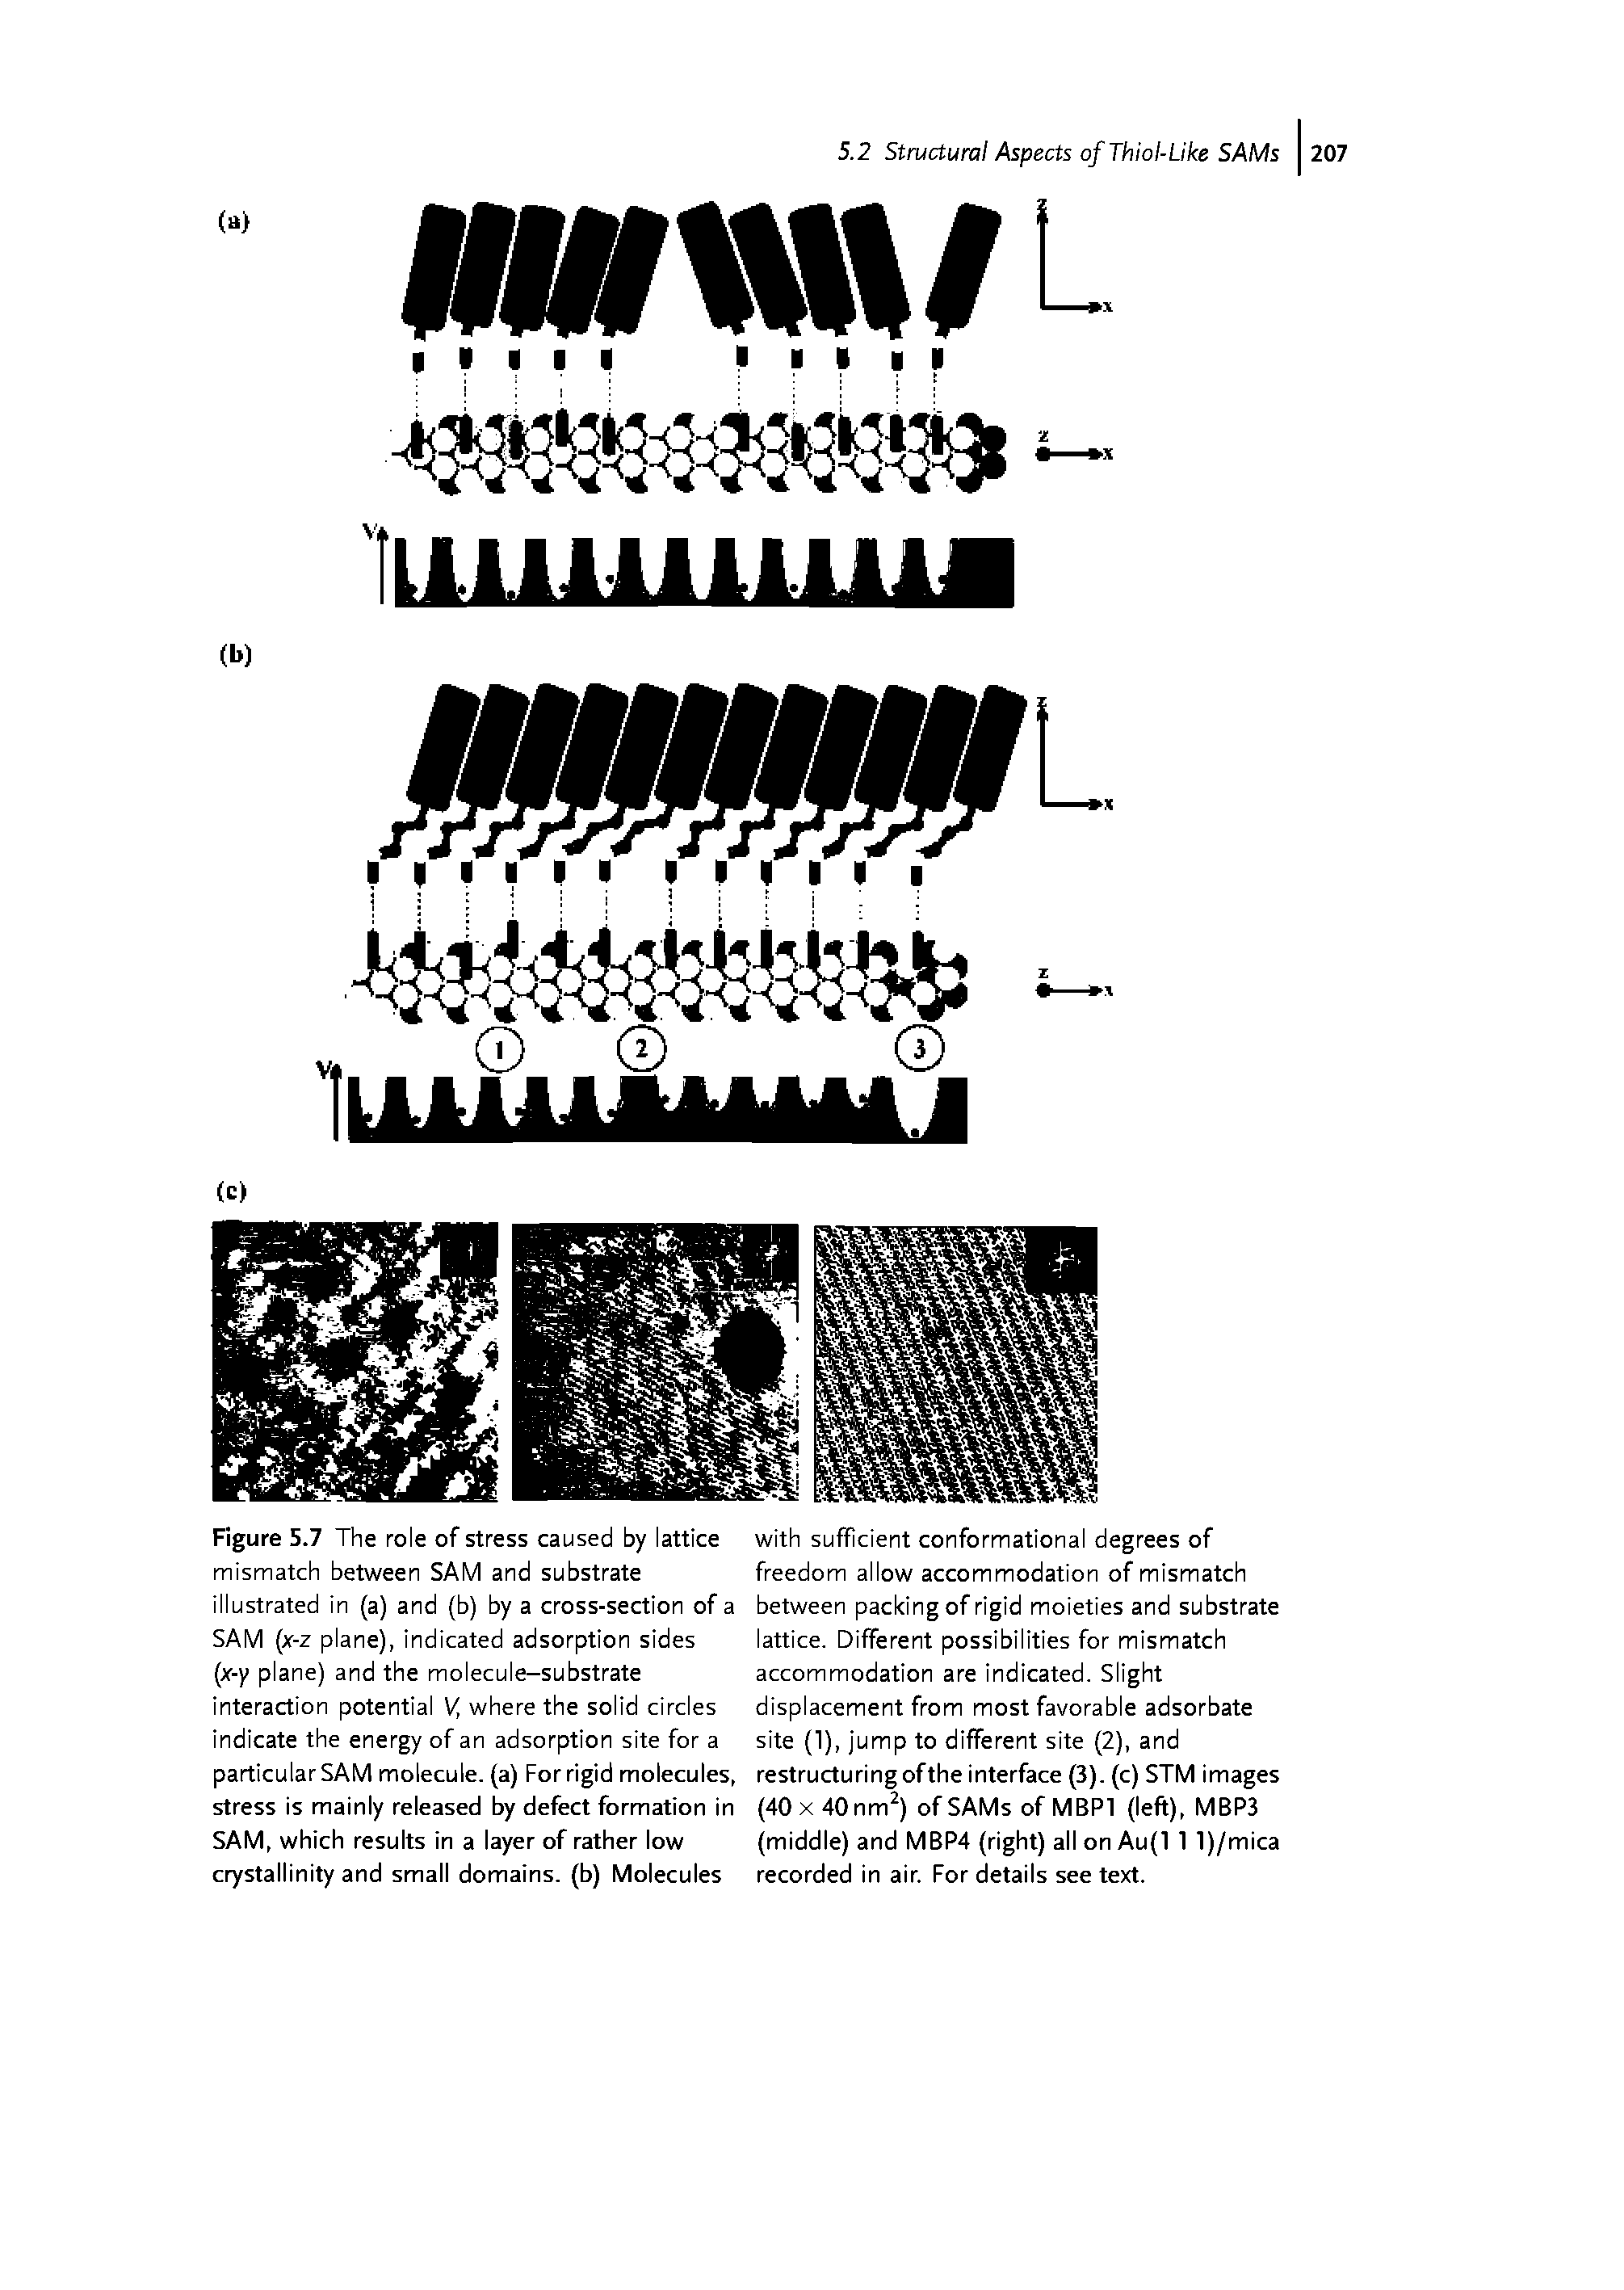 Figure 5.7 The role of stress caused by lattice mismatch between SAM and substrate illustrated in (a) and (b) by a cross-section of a SAM (x-z plane), indicated adsorption sides (x-y plane) and the molecule-substrate interaction potential V where the solid circles indicate the energy of an adsorption site for a particular SAM molecule, (a) For rigid molecules, stress is mainly released by defect formation in SAM, which results in a layer of rather low crystallinity and small domains, (b) Molecules...